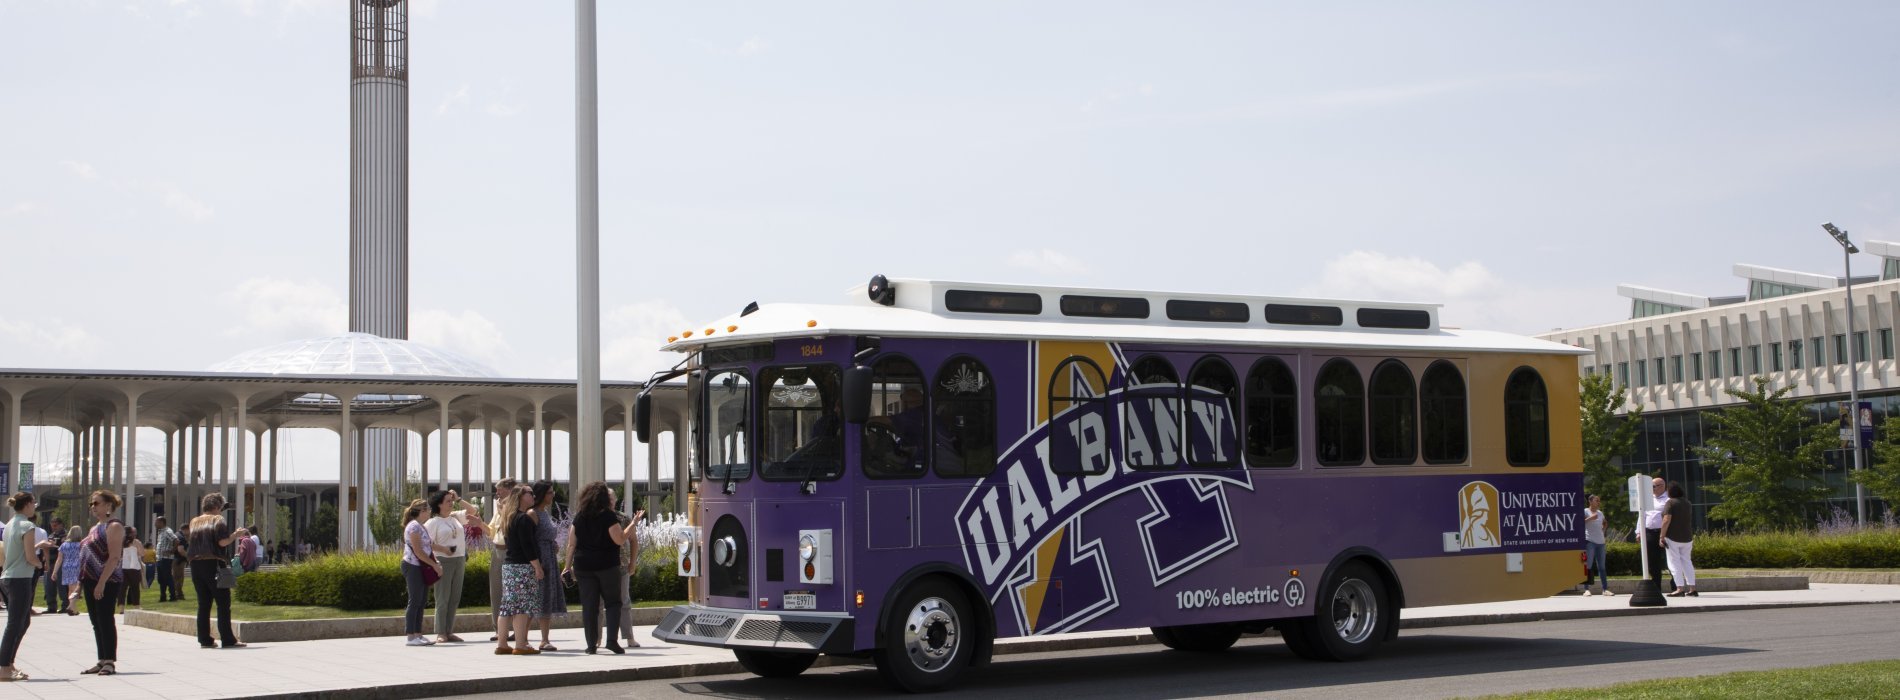 The UAlbany trolley parked in Collins Circle